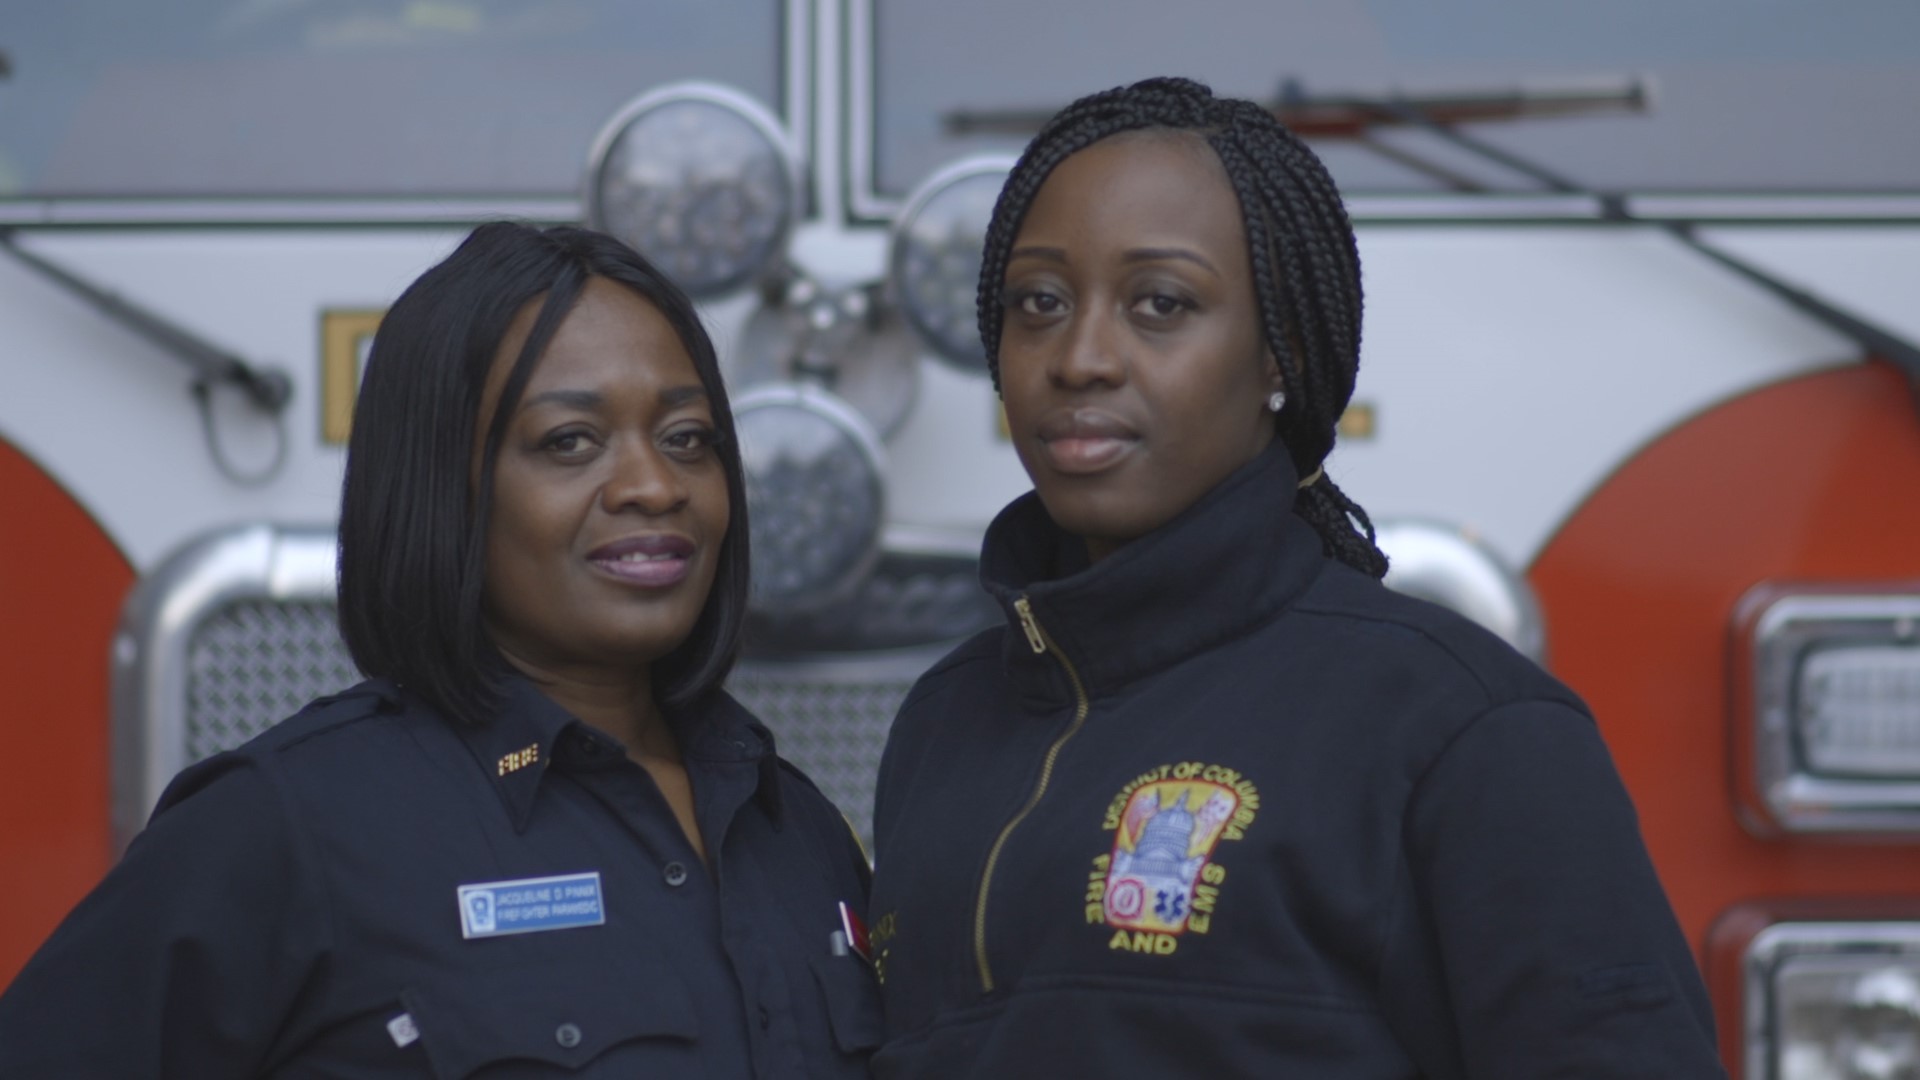 Jacqueline thought she was too old to become a firefighter. People questioned Jalisa because she's a woman. So they trained together until they became one of the department’s few mother-daughter duos.